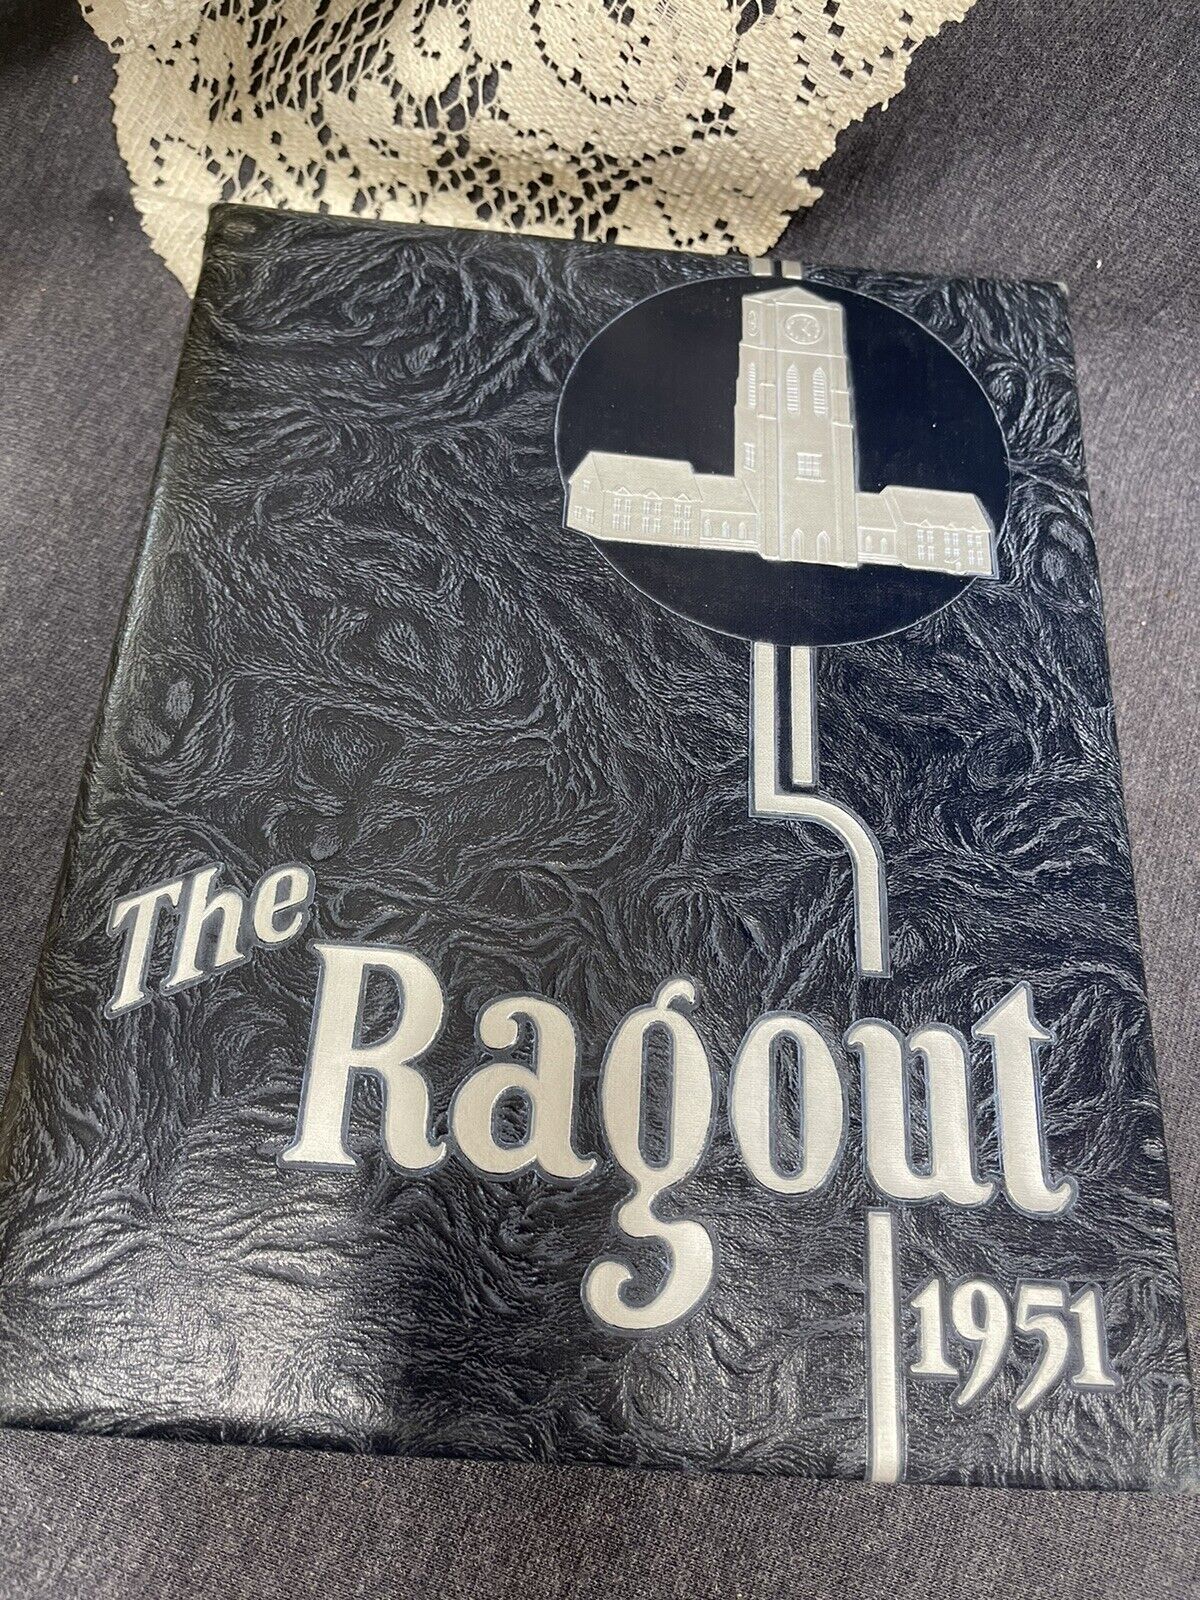 Central College Fayette Missouri The Ragout Yearbook 1951